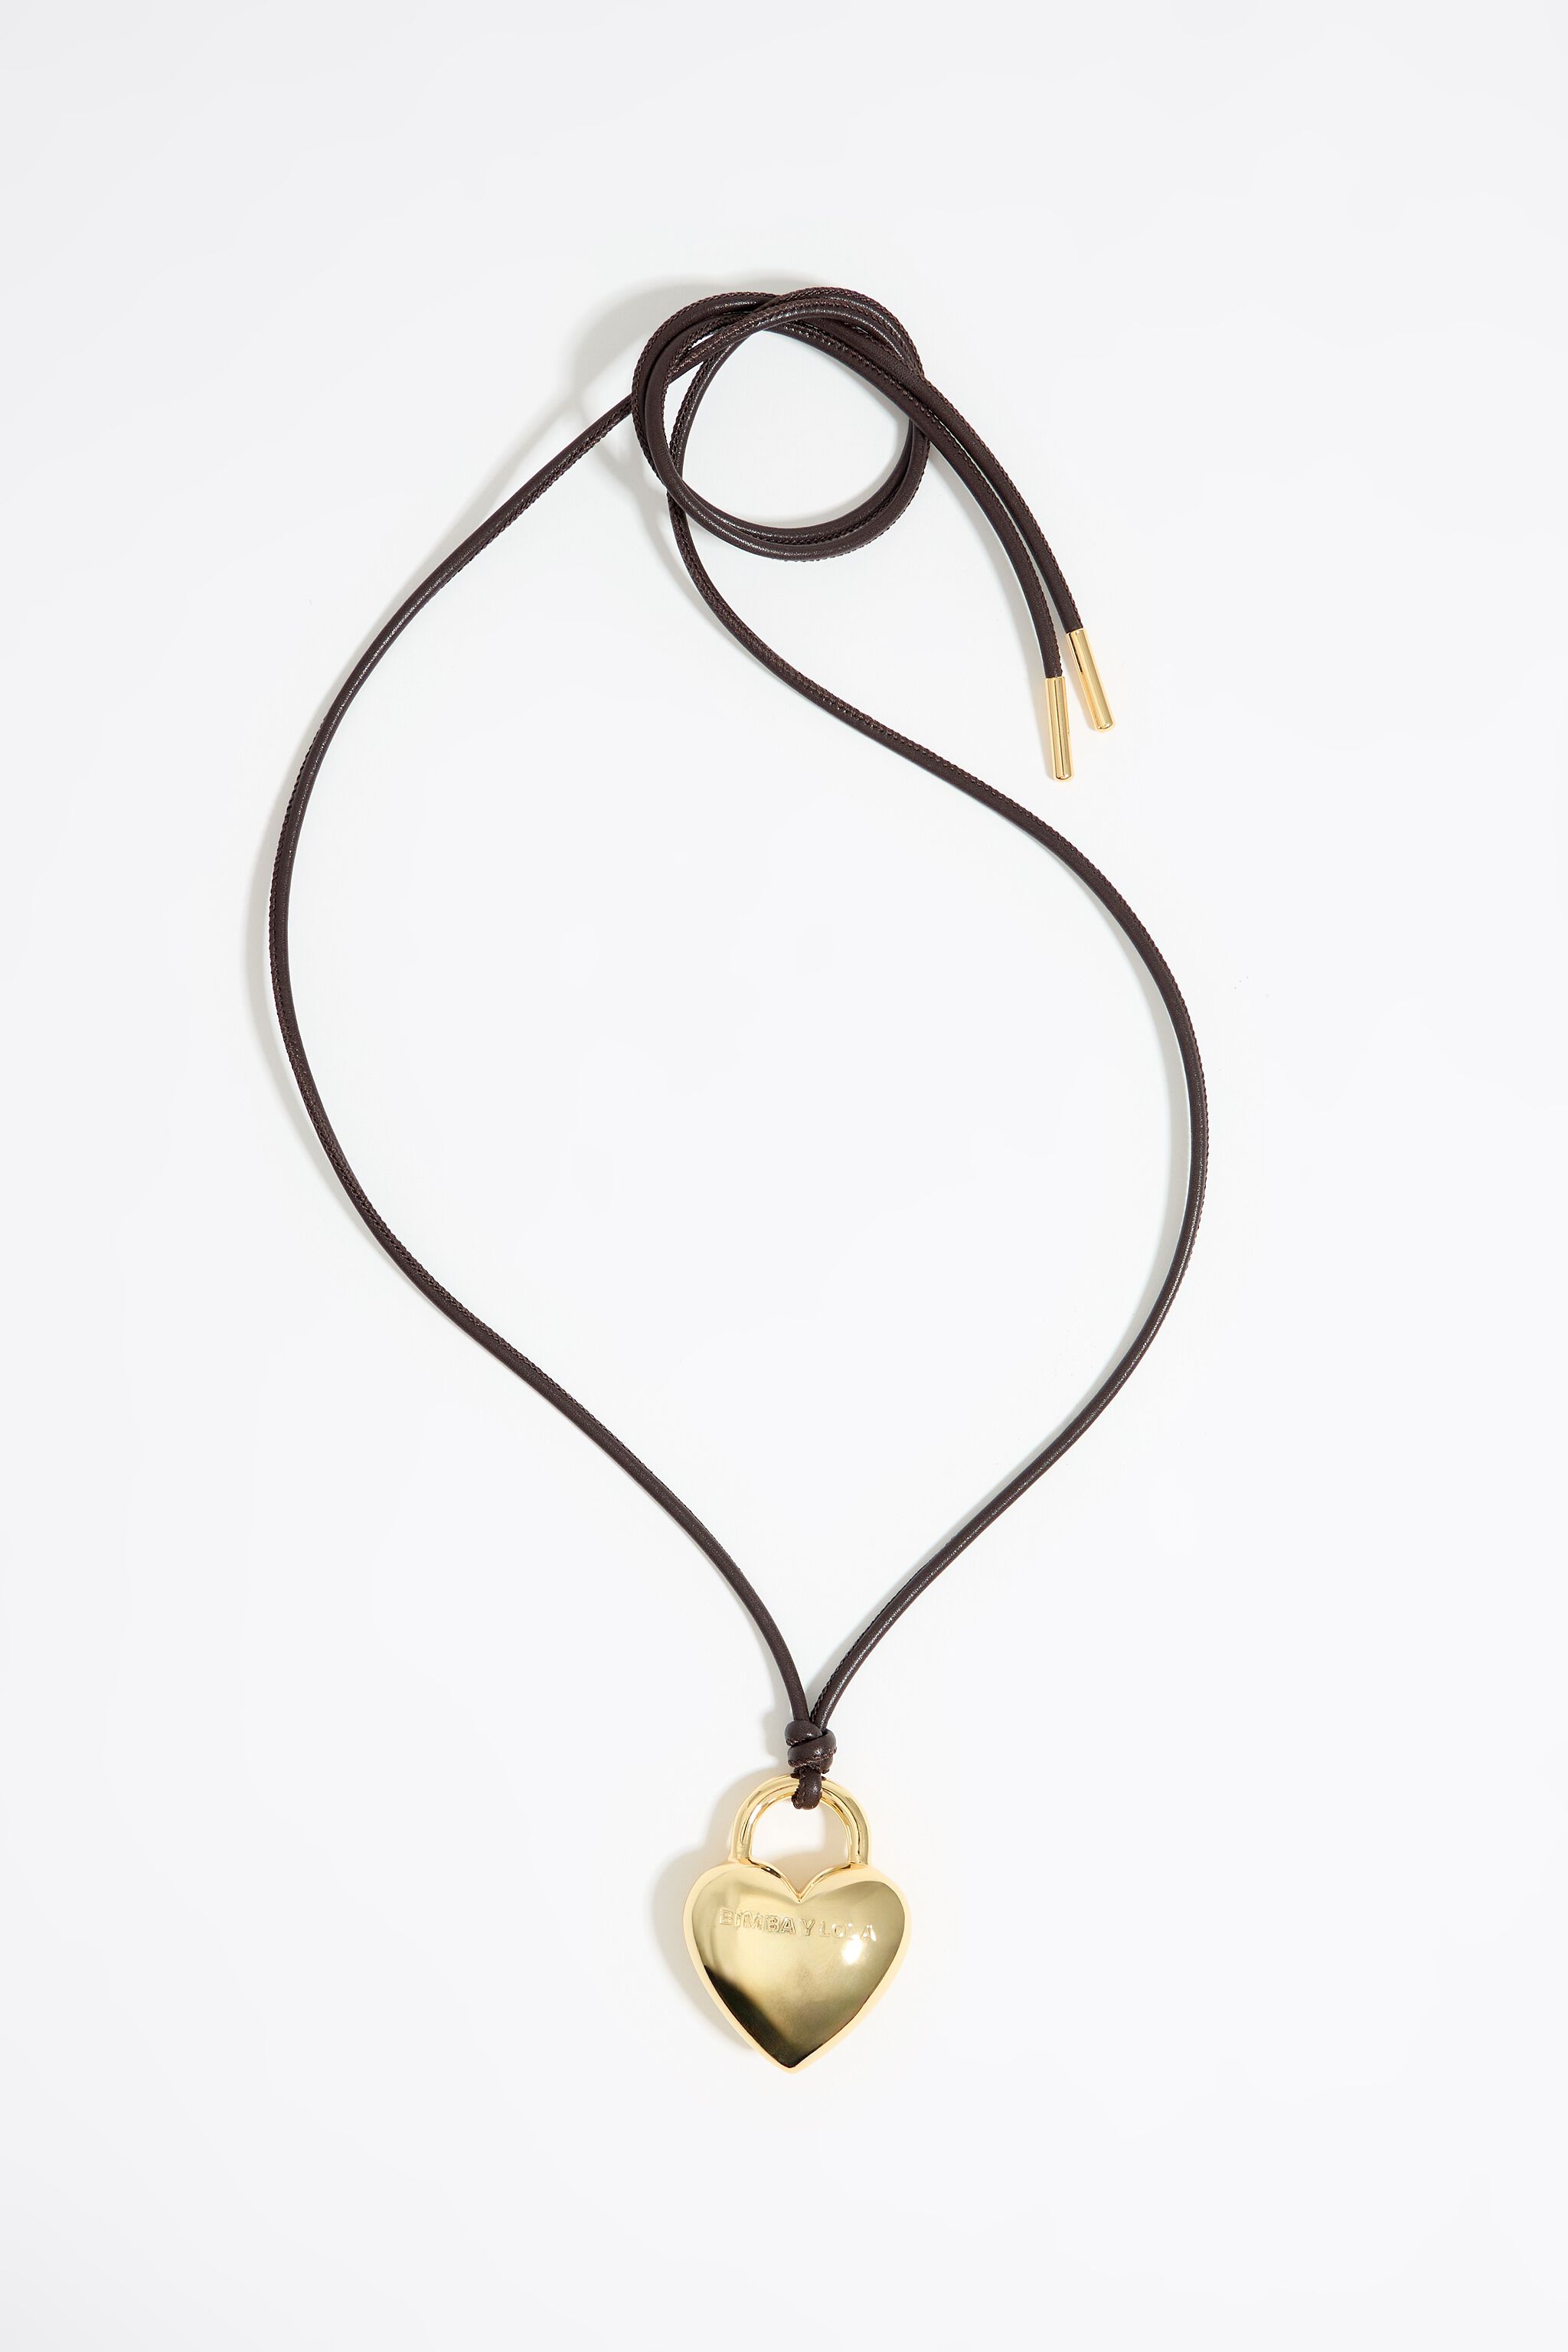 Rustic-Chic: Find Your Perfect Leather Cord Necklace To Complete Your Look!